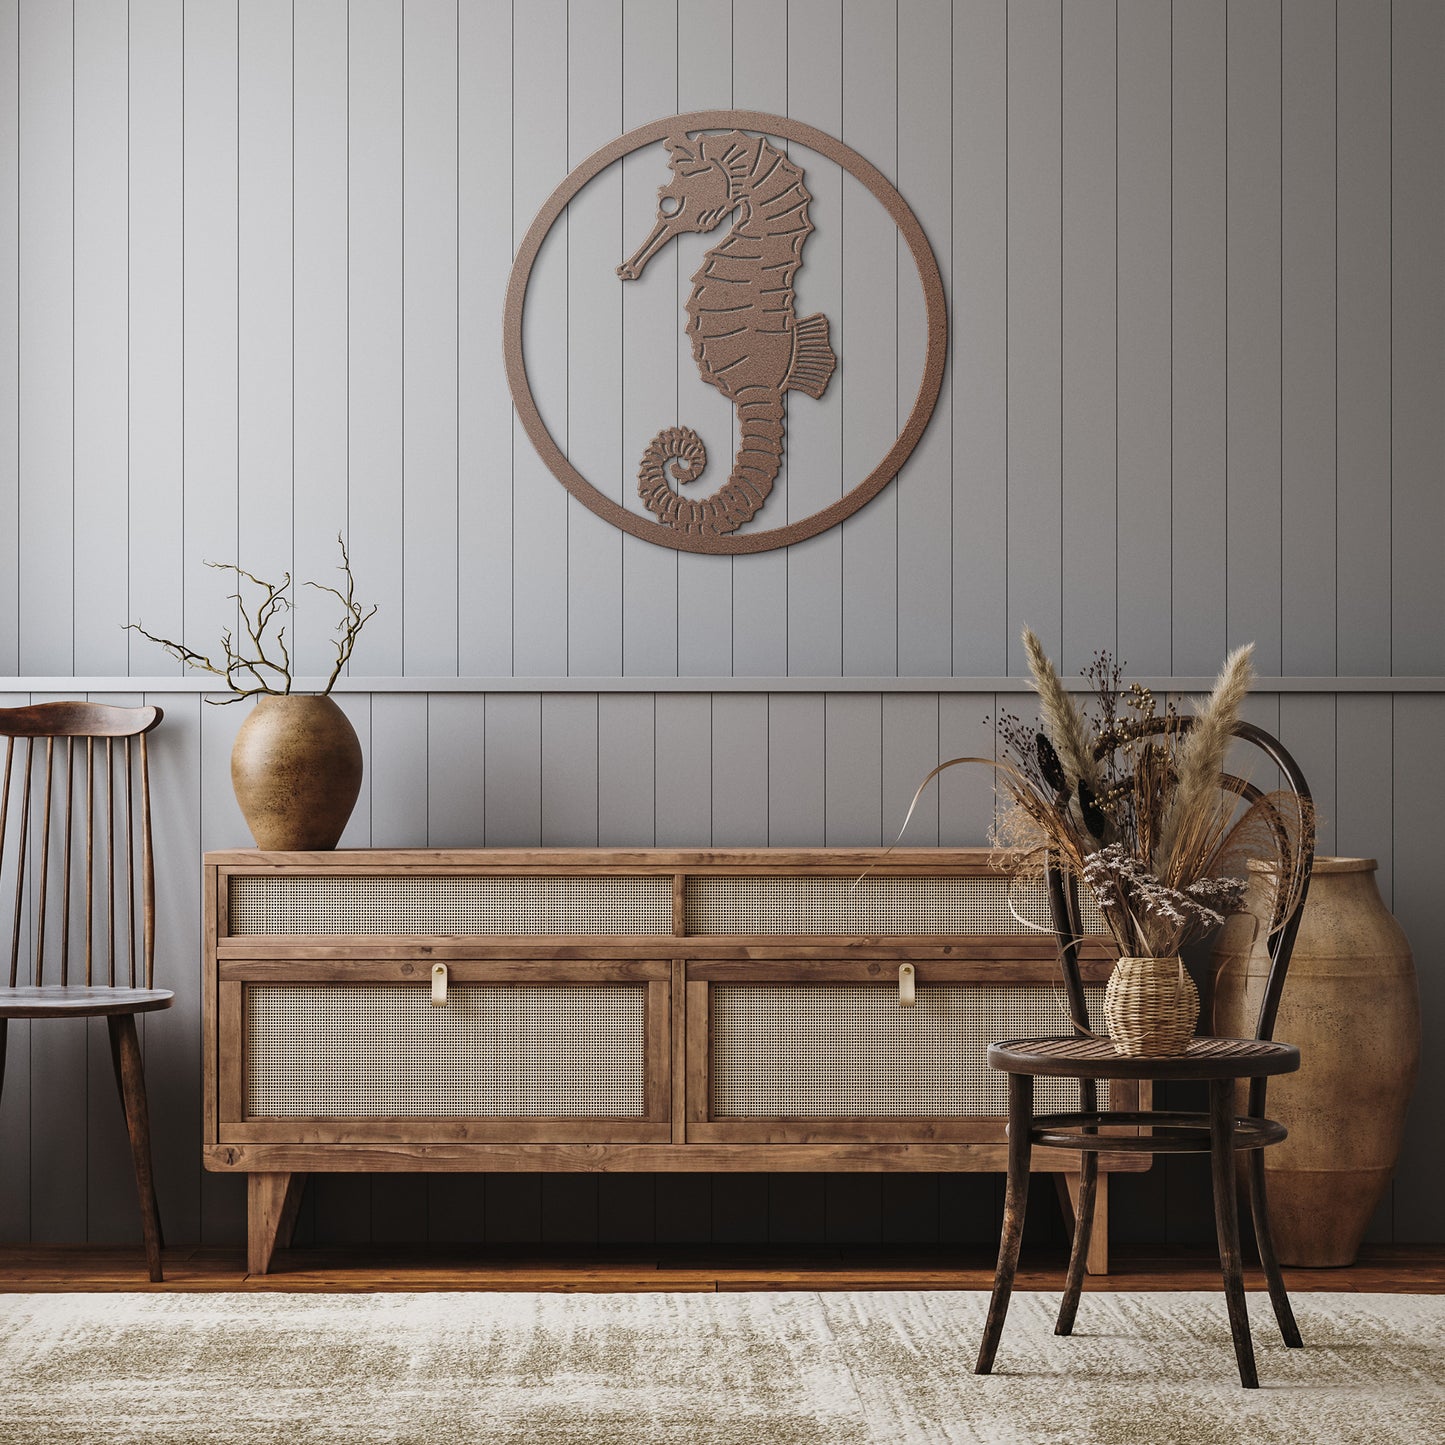 Metal Sign-Seahorse Indoor/Outdoor Metal Sign- Coastal Home Sign, Beach House Sign, Housewarming Gifts